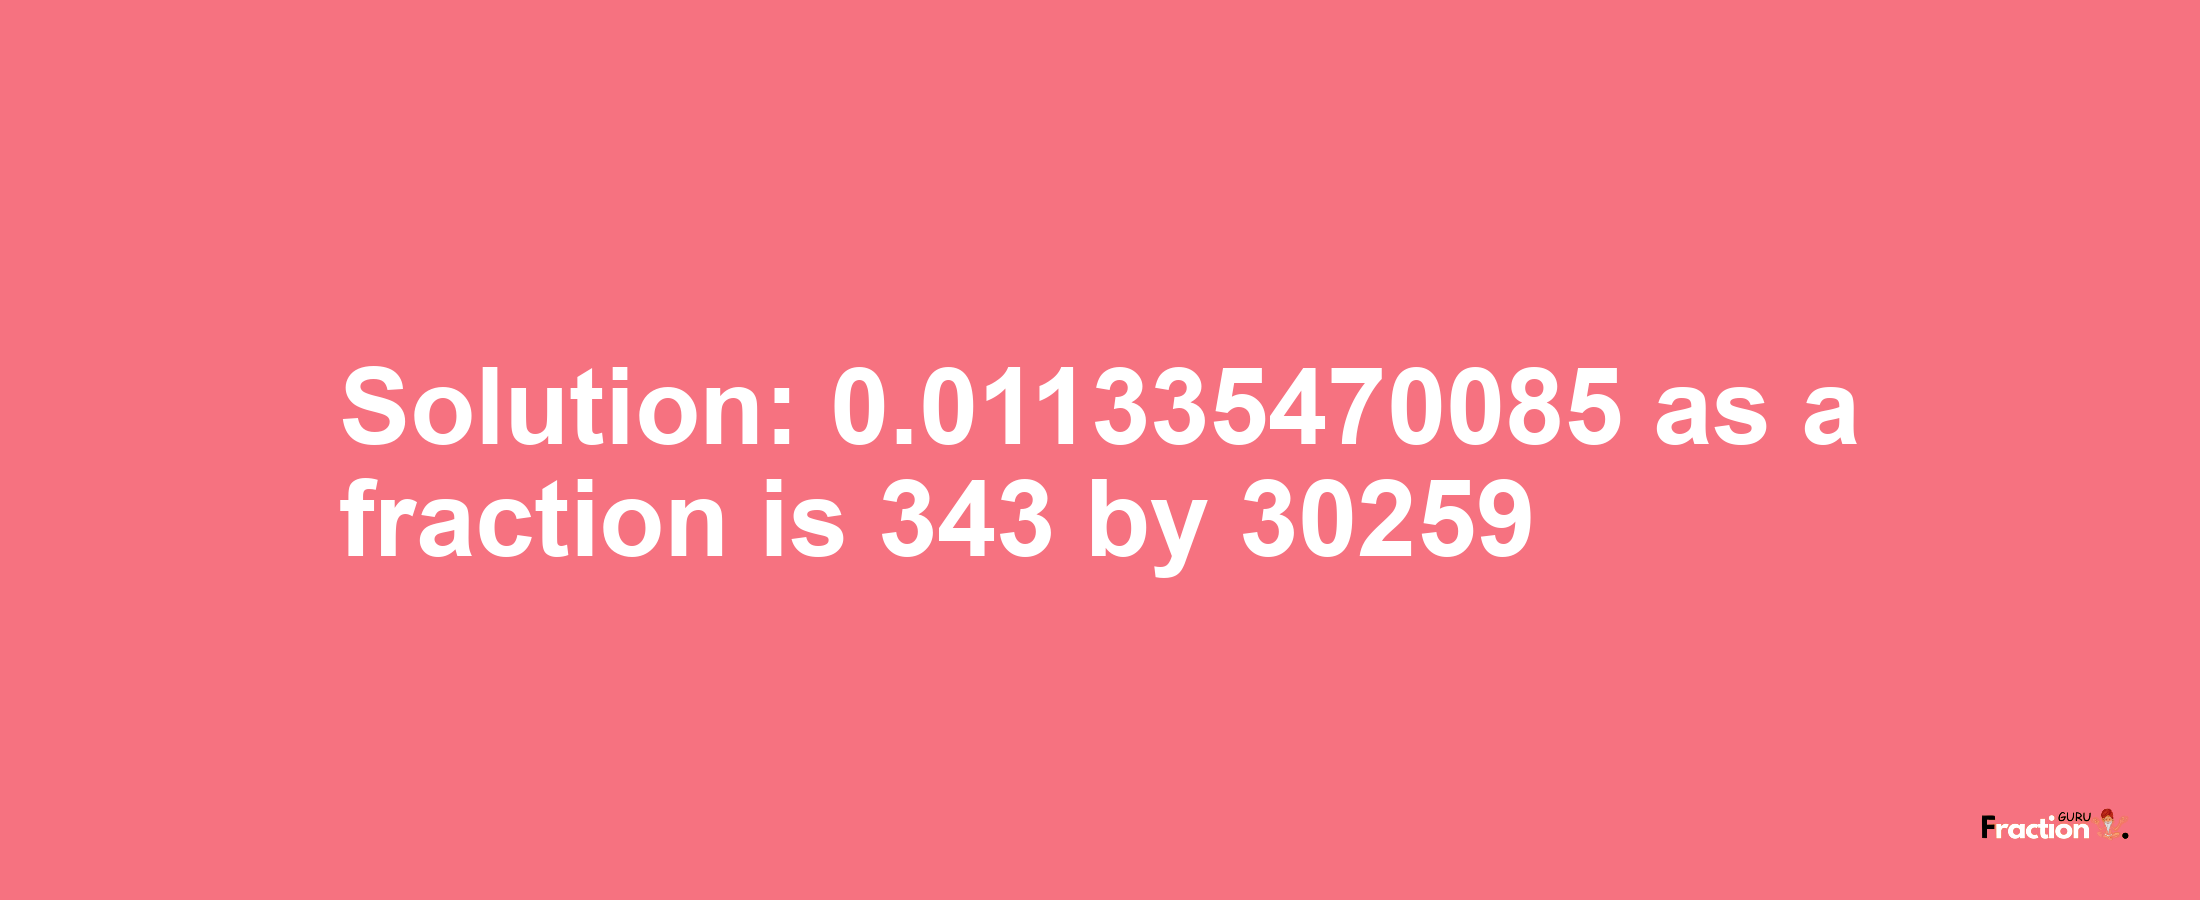 Solution:0.011335470085 as a fraction is 343/30259